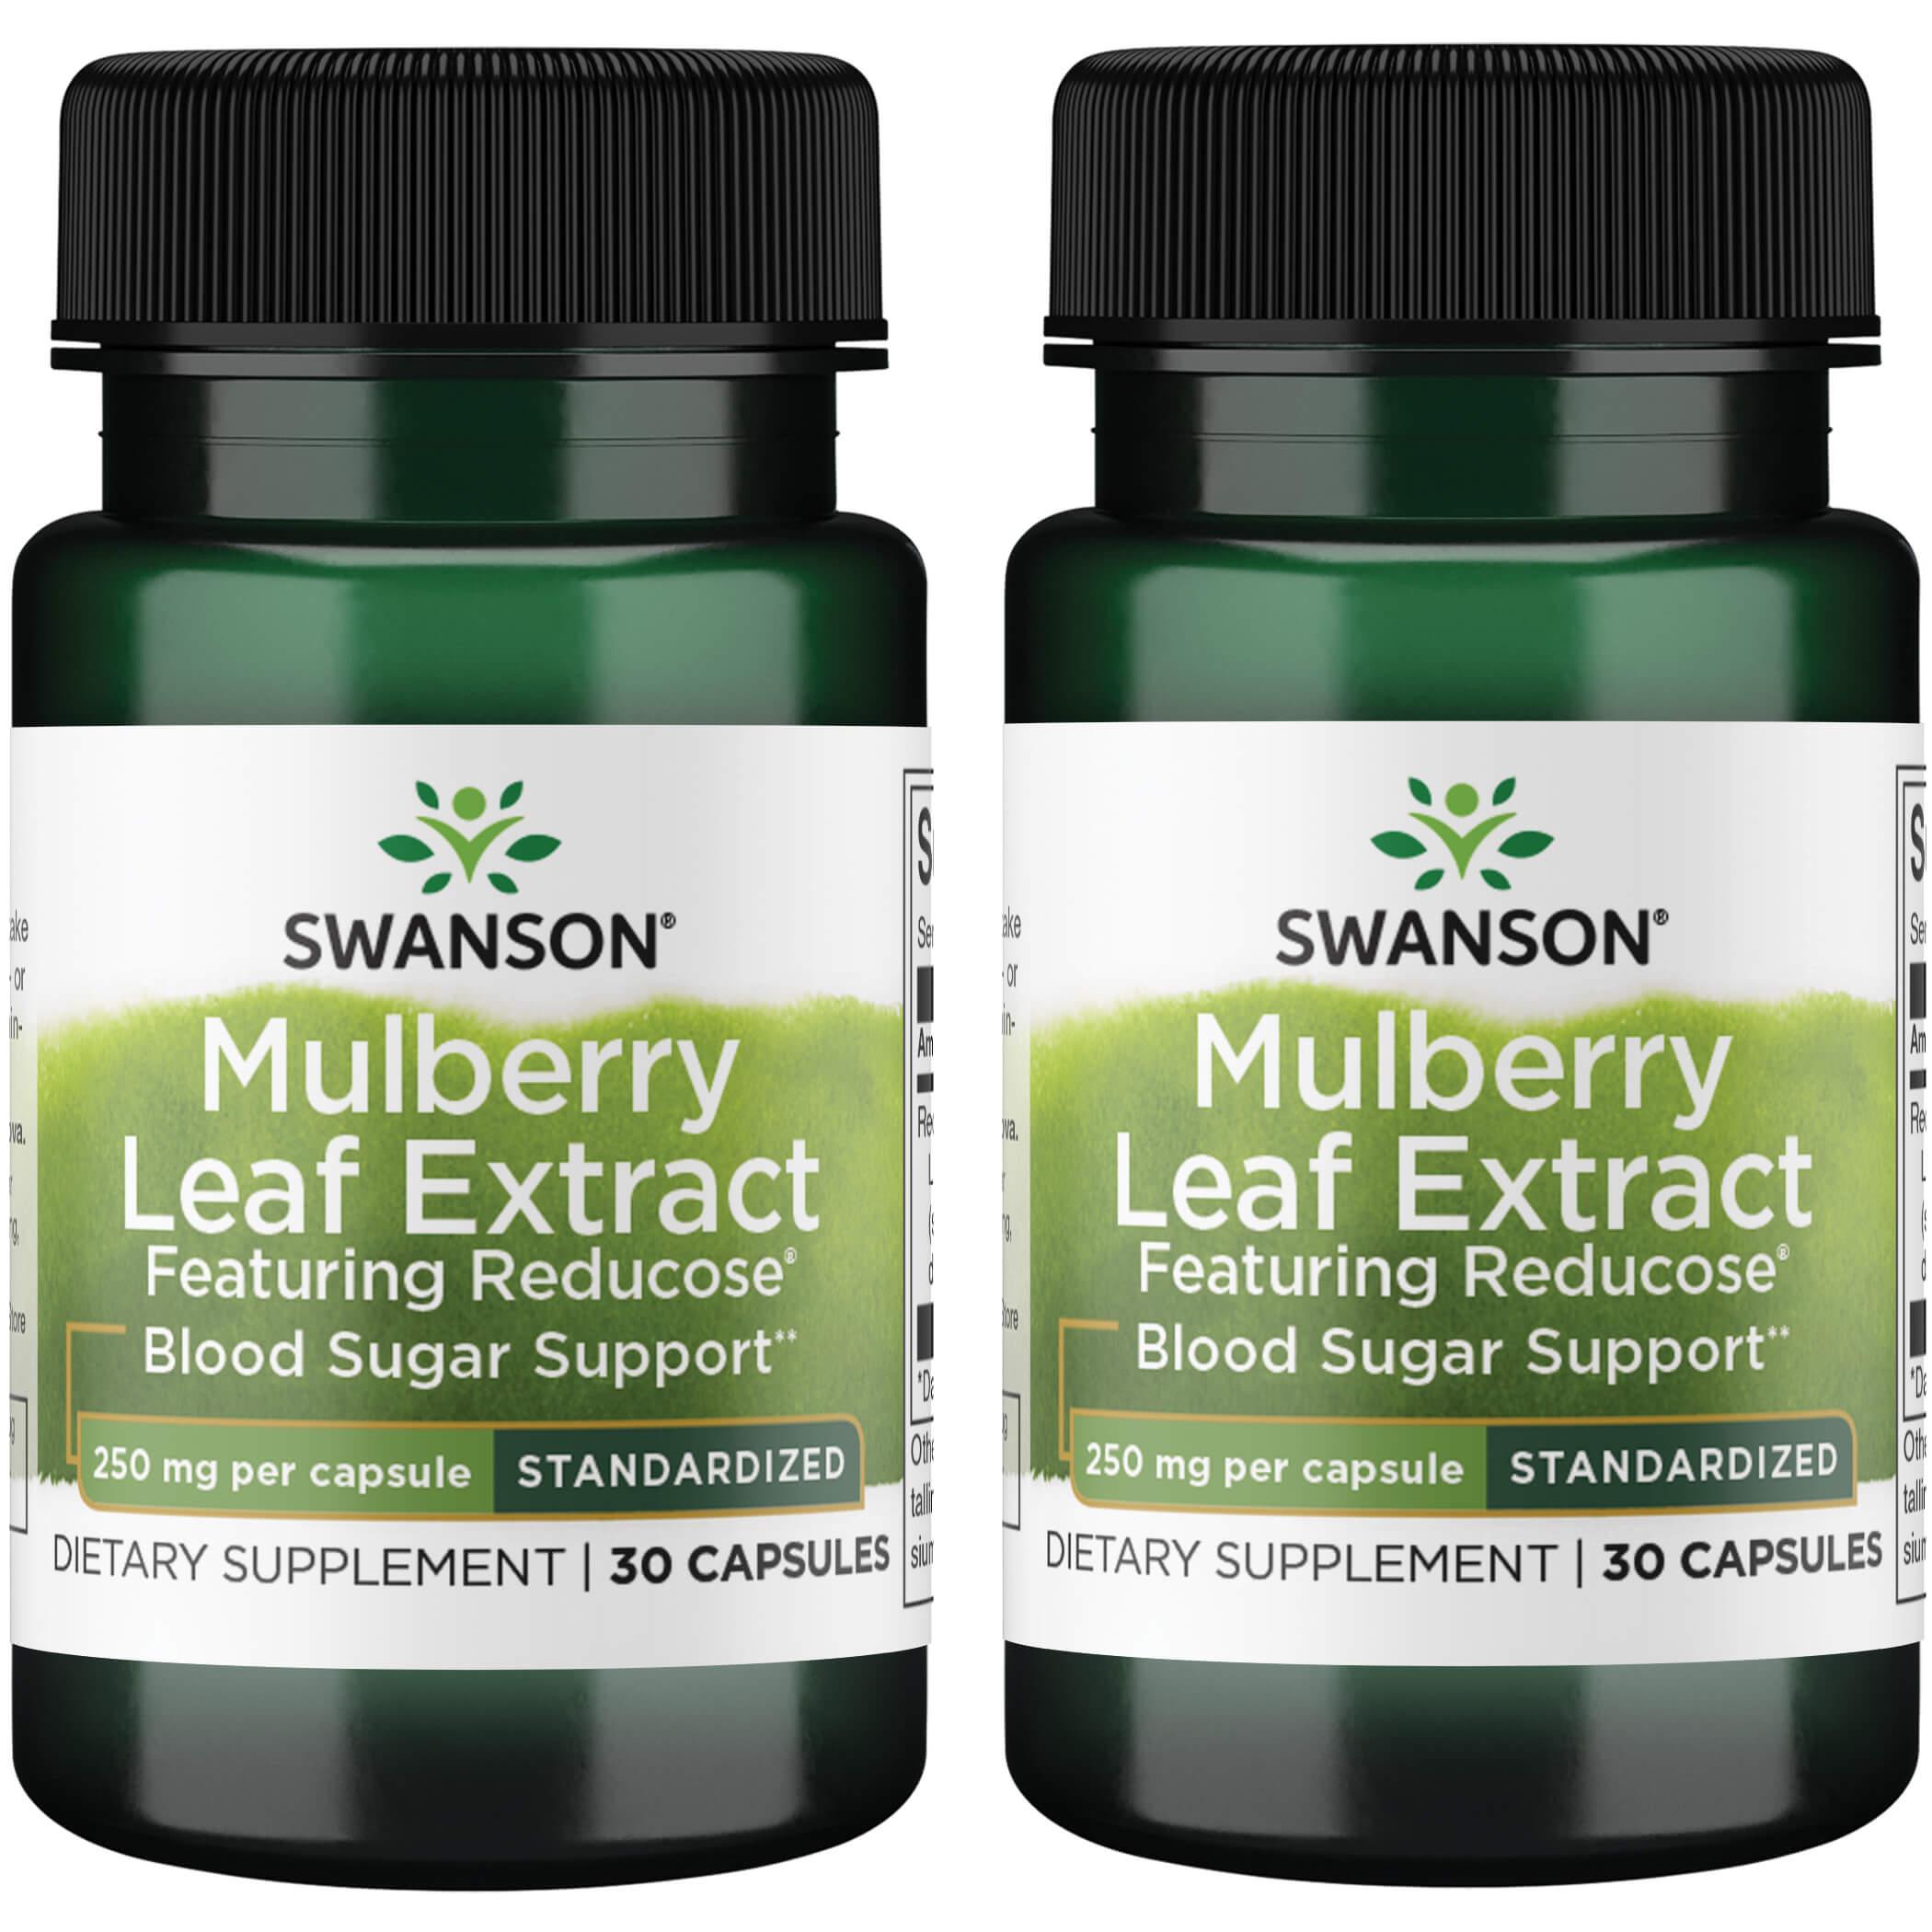 Swanson Premium Mulberry Leaf Extract - Featuring Reducose Standardized 2 Pack Vitamin 250 mg 30 Caps